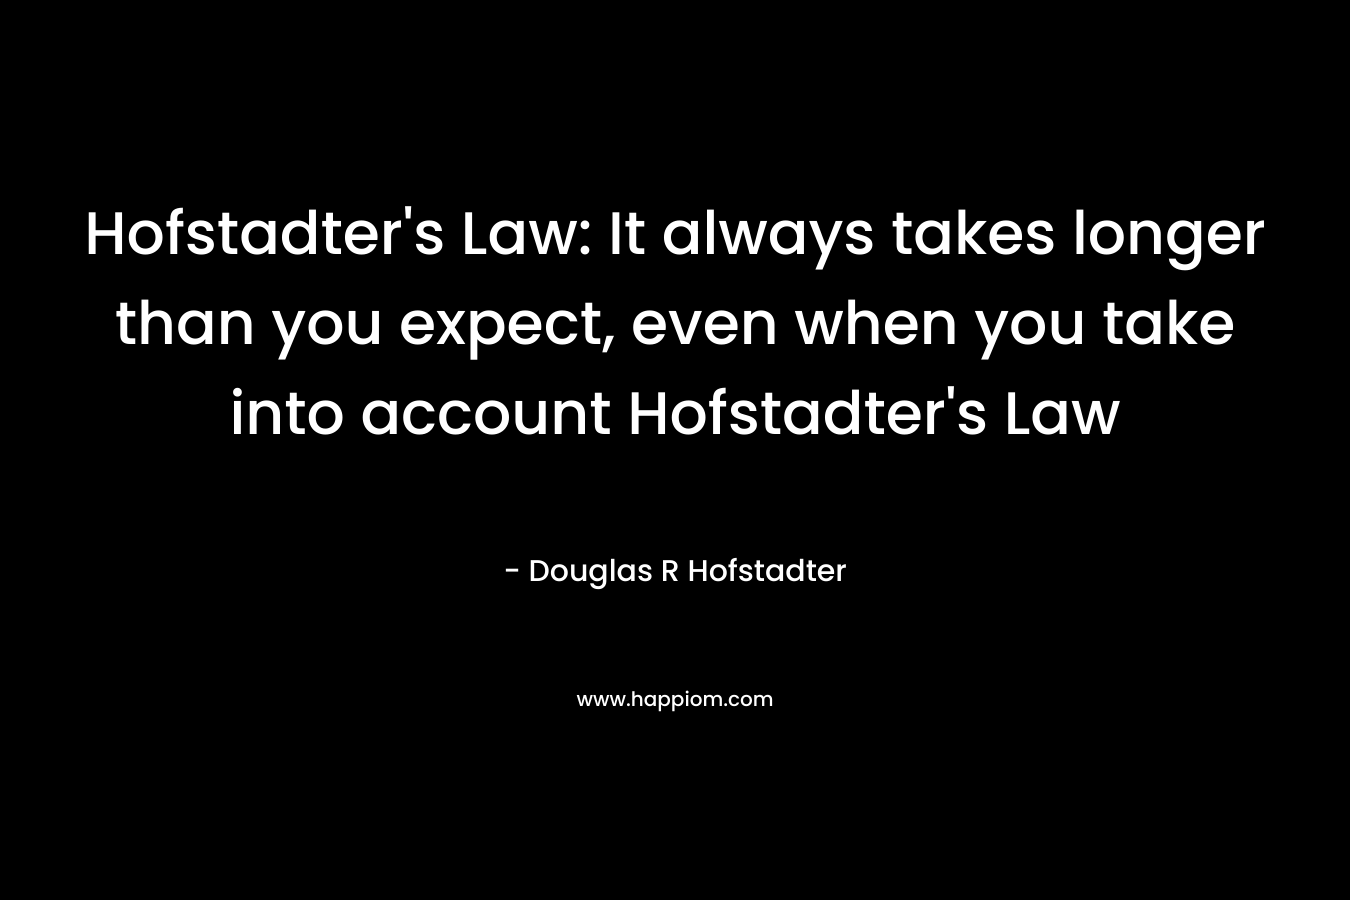 Hofstadter’s Law: It always takes longer than you expect, even when you take into account Hofstadter’s Law – Douglas R Hofstadter